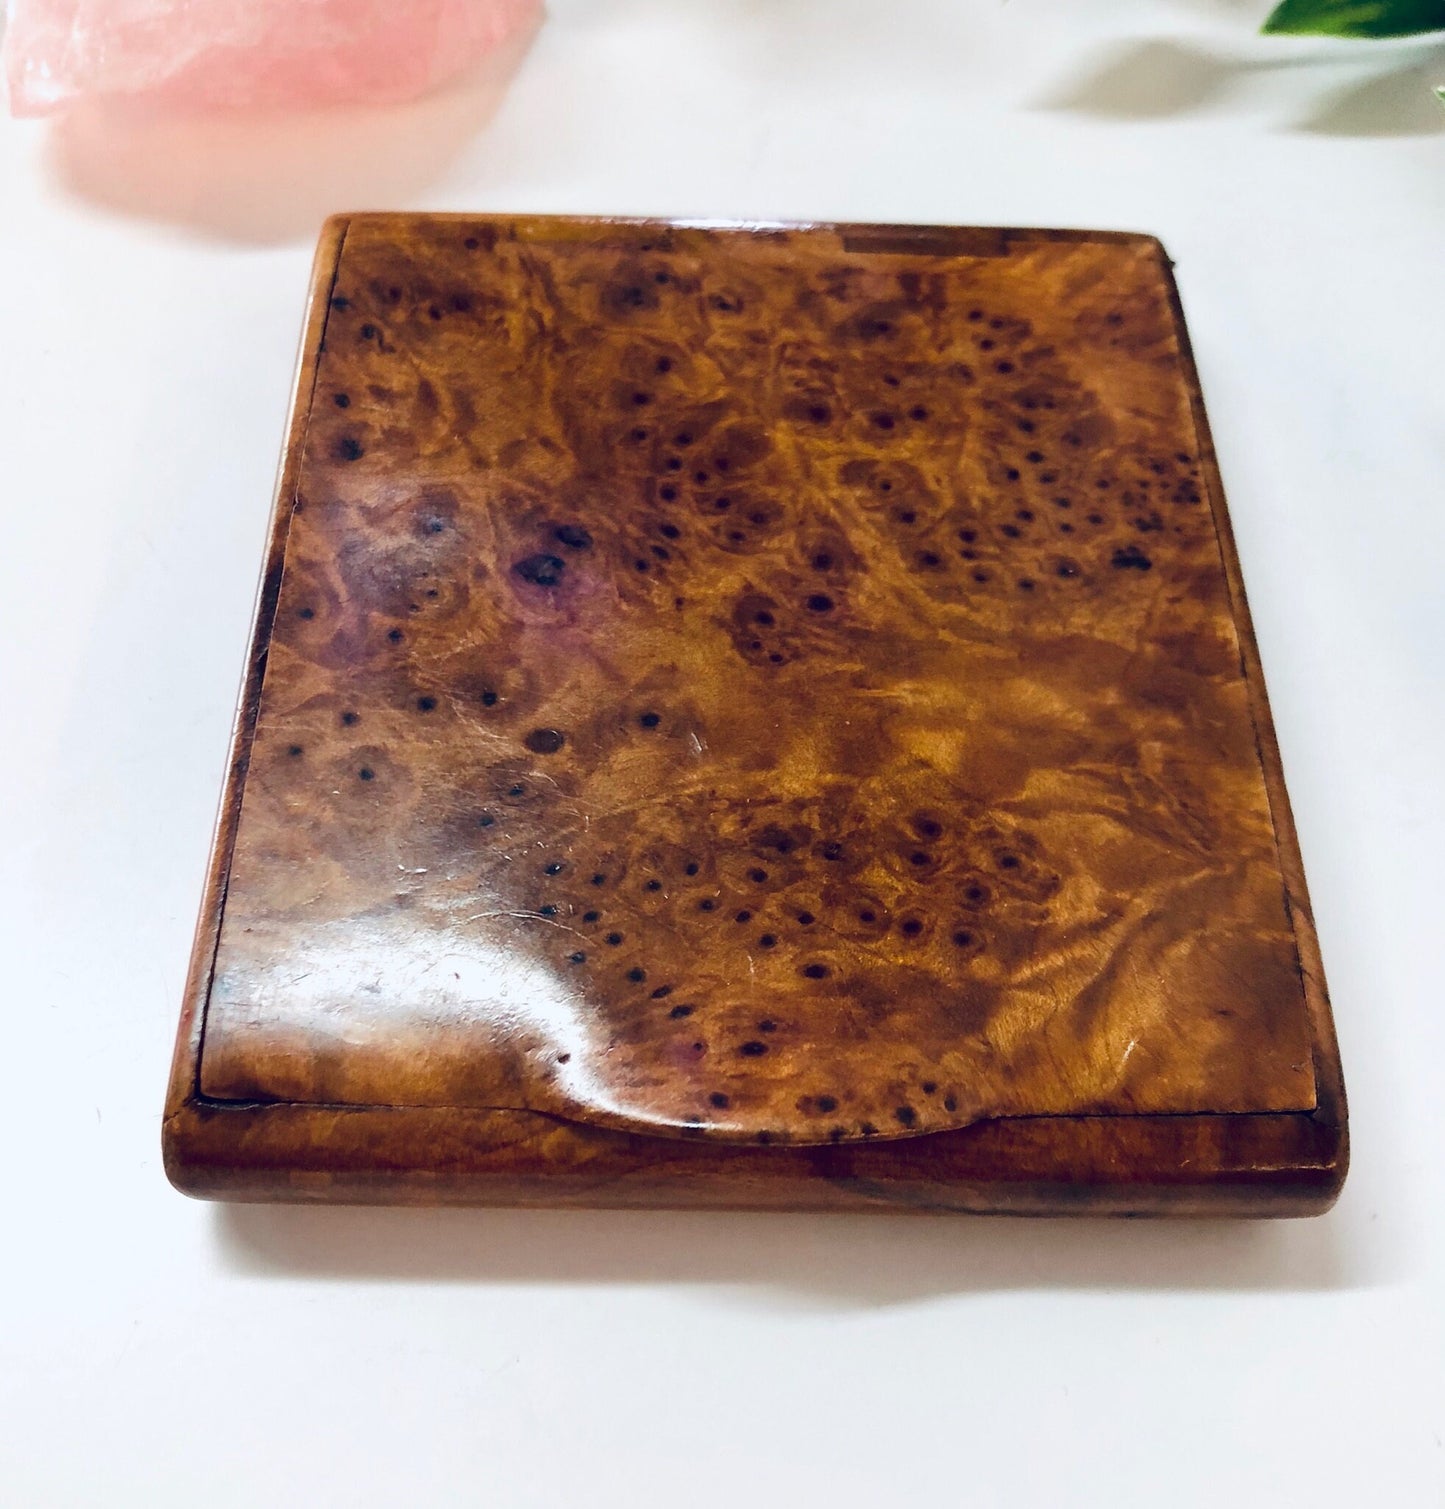 Vintage wooden hinged box with light brown burl wood grain pattern, suitable for use as a cigarette case, business card holder, or small container.